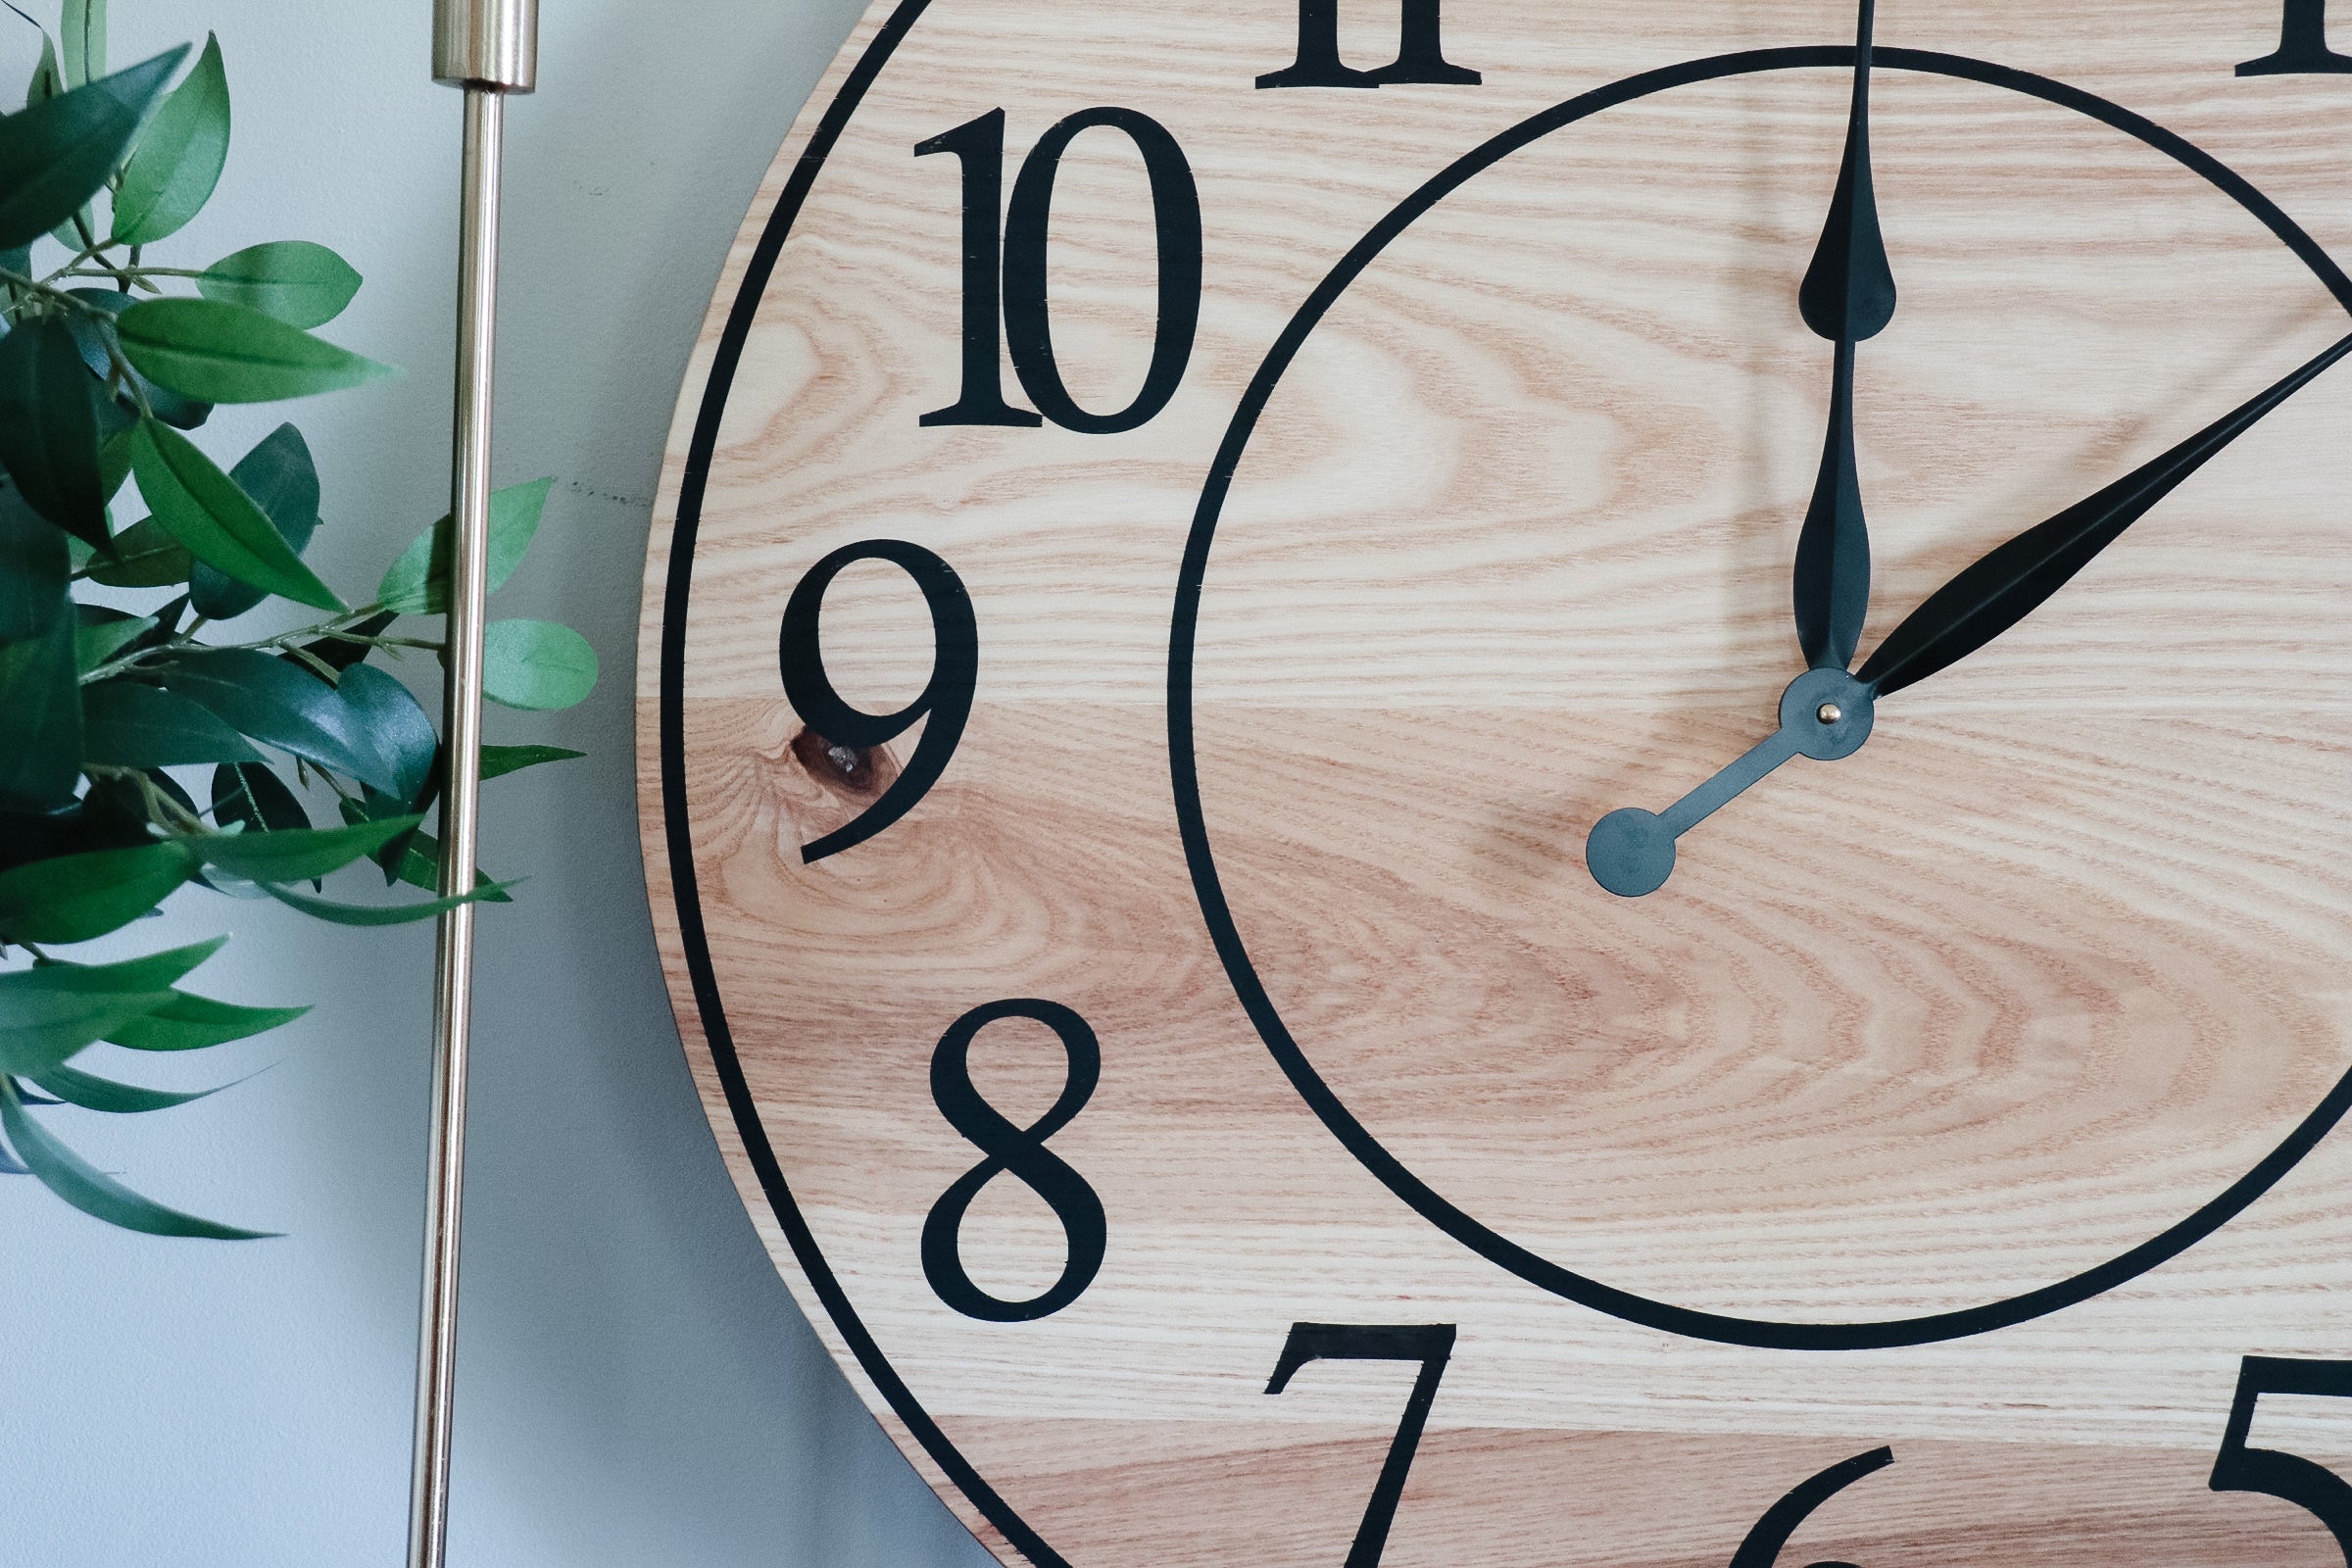 Solid Ash Wood Wall Clock with Black Numbers and Lines